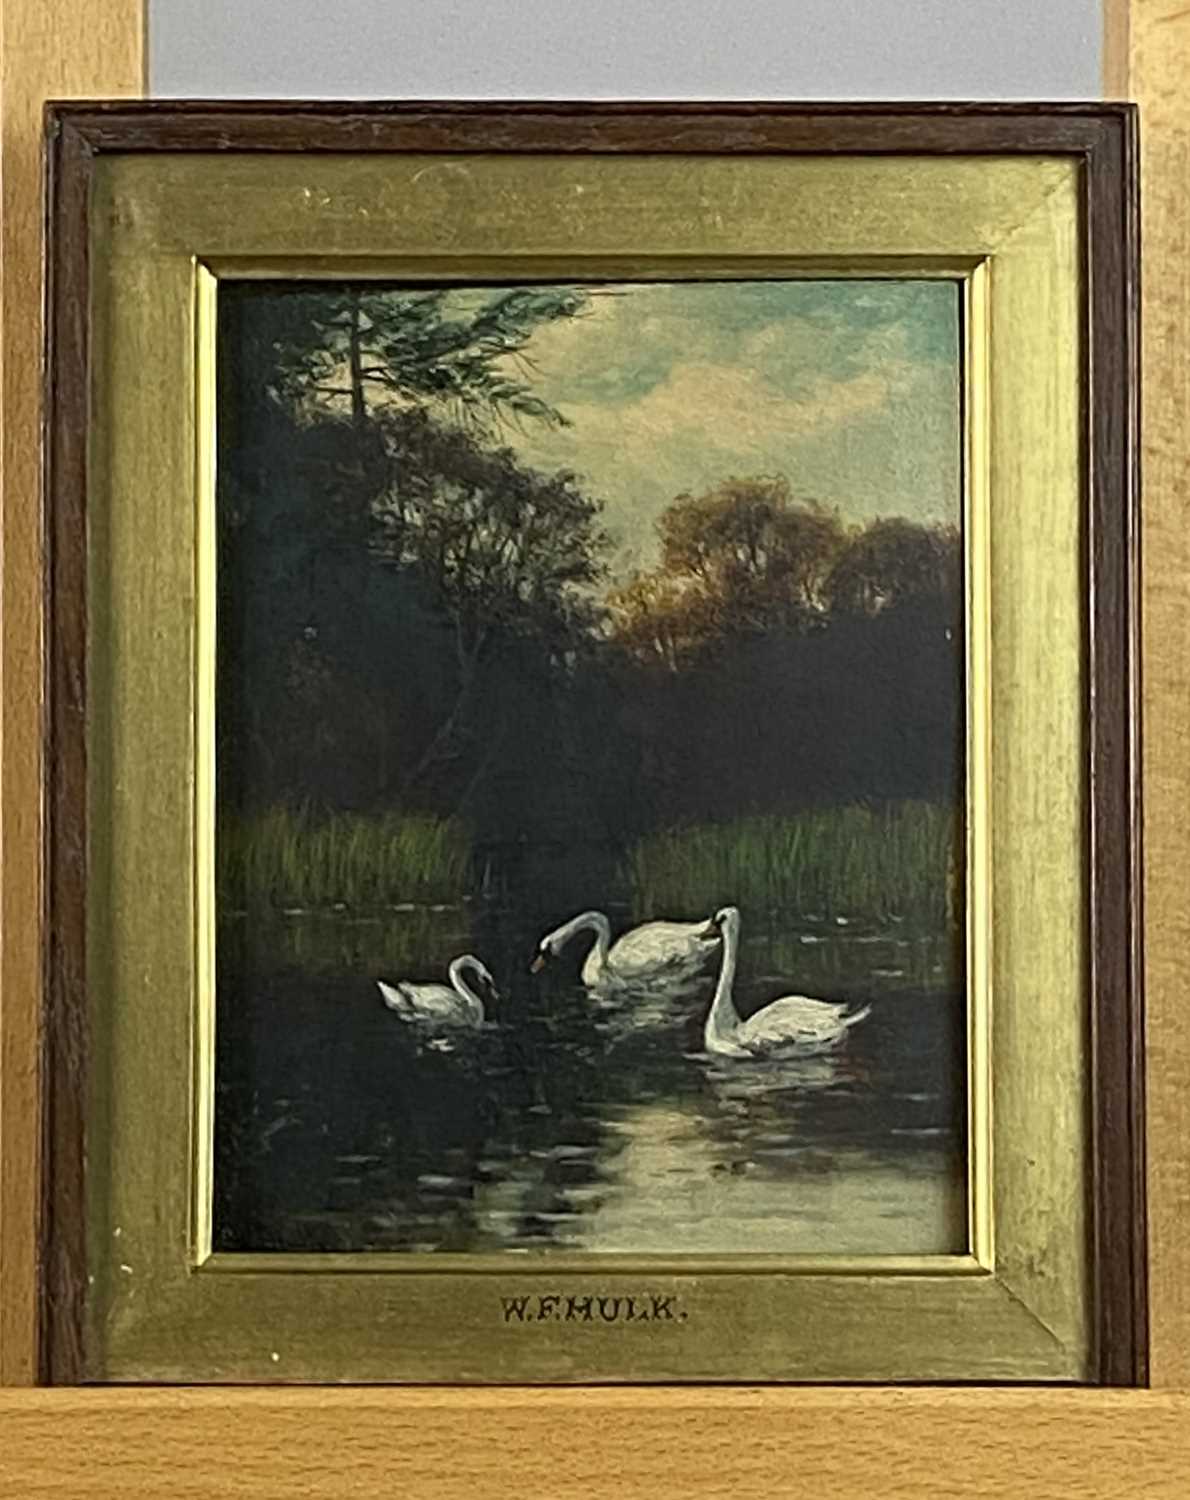 William Frederick Hulk (1852-1922) Pool and River Scenes with Ducks and Swans - Image 9 of 12